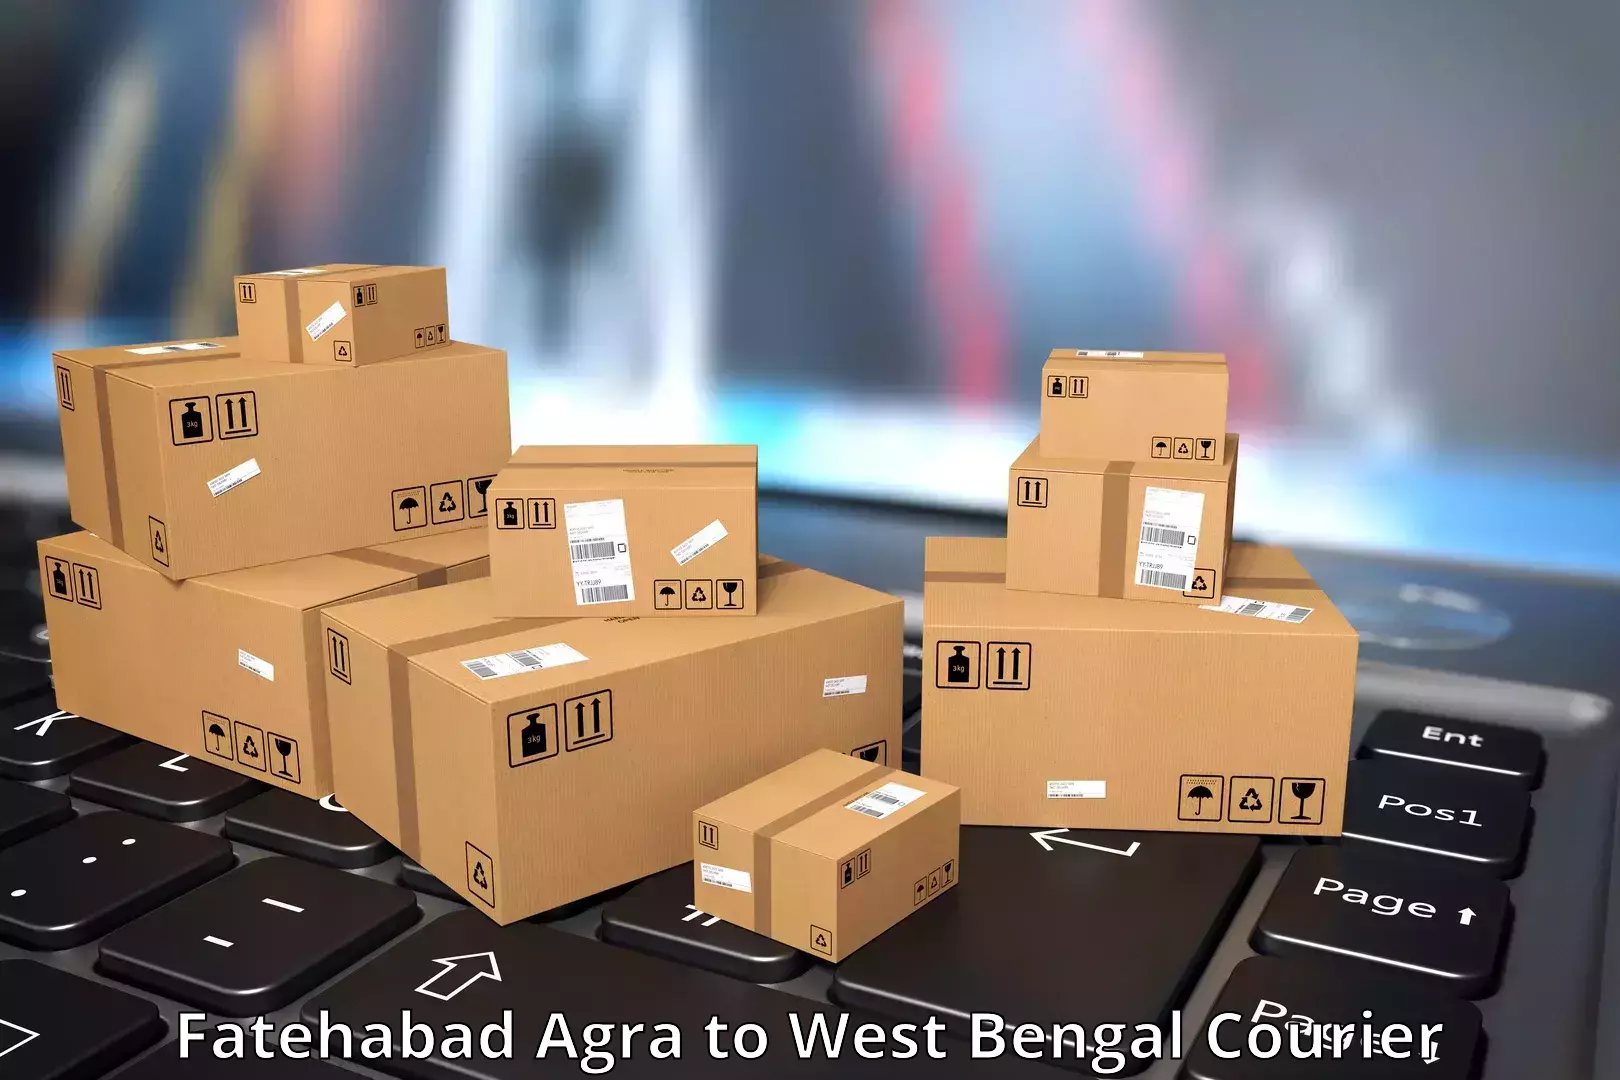 Professional parcel services Fatehabad Agra to Palasi